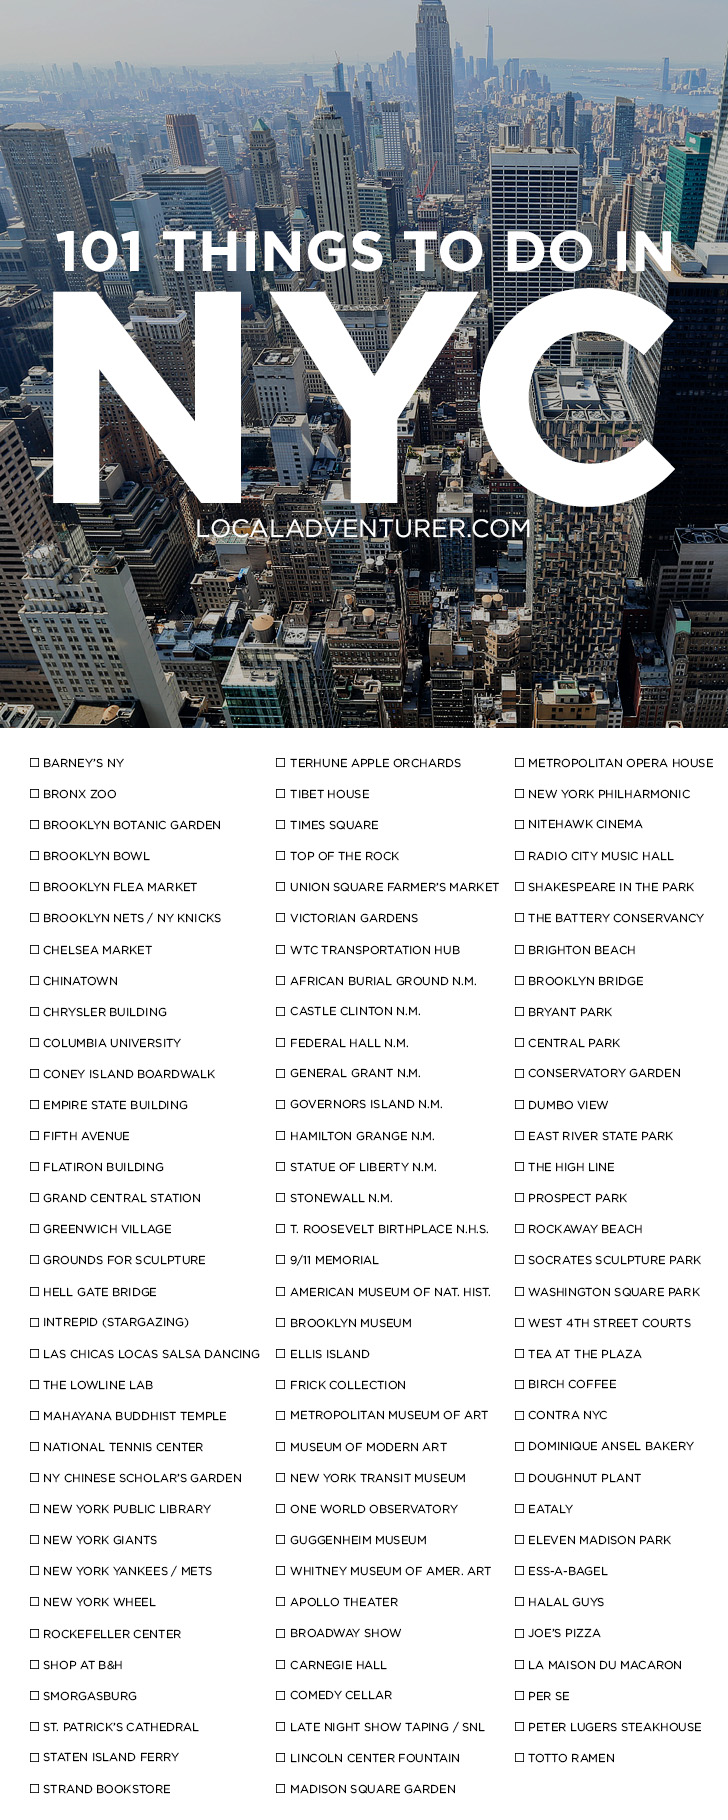 Check out our 101 Things to Do in NYC Bucket List - from the touristy spots everyone has to do at least once to the spots a little more off the beaten path. // localadventurer.com